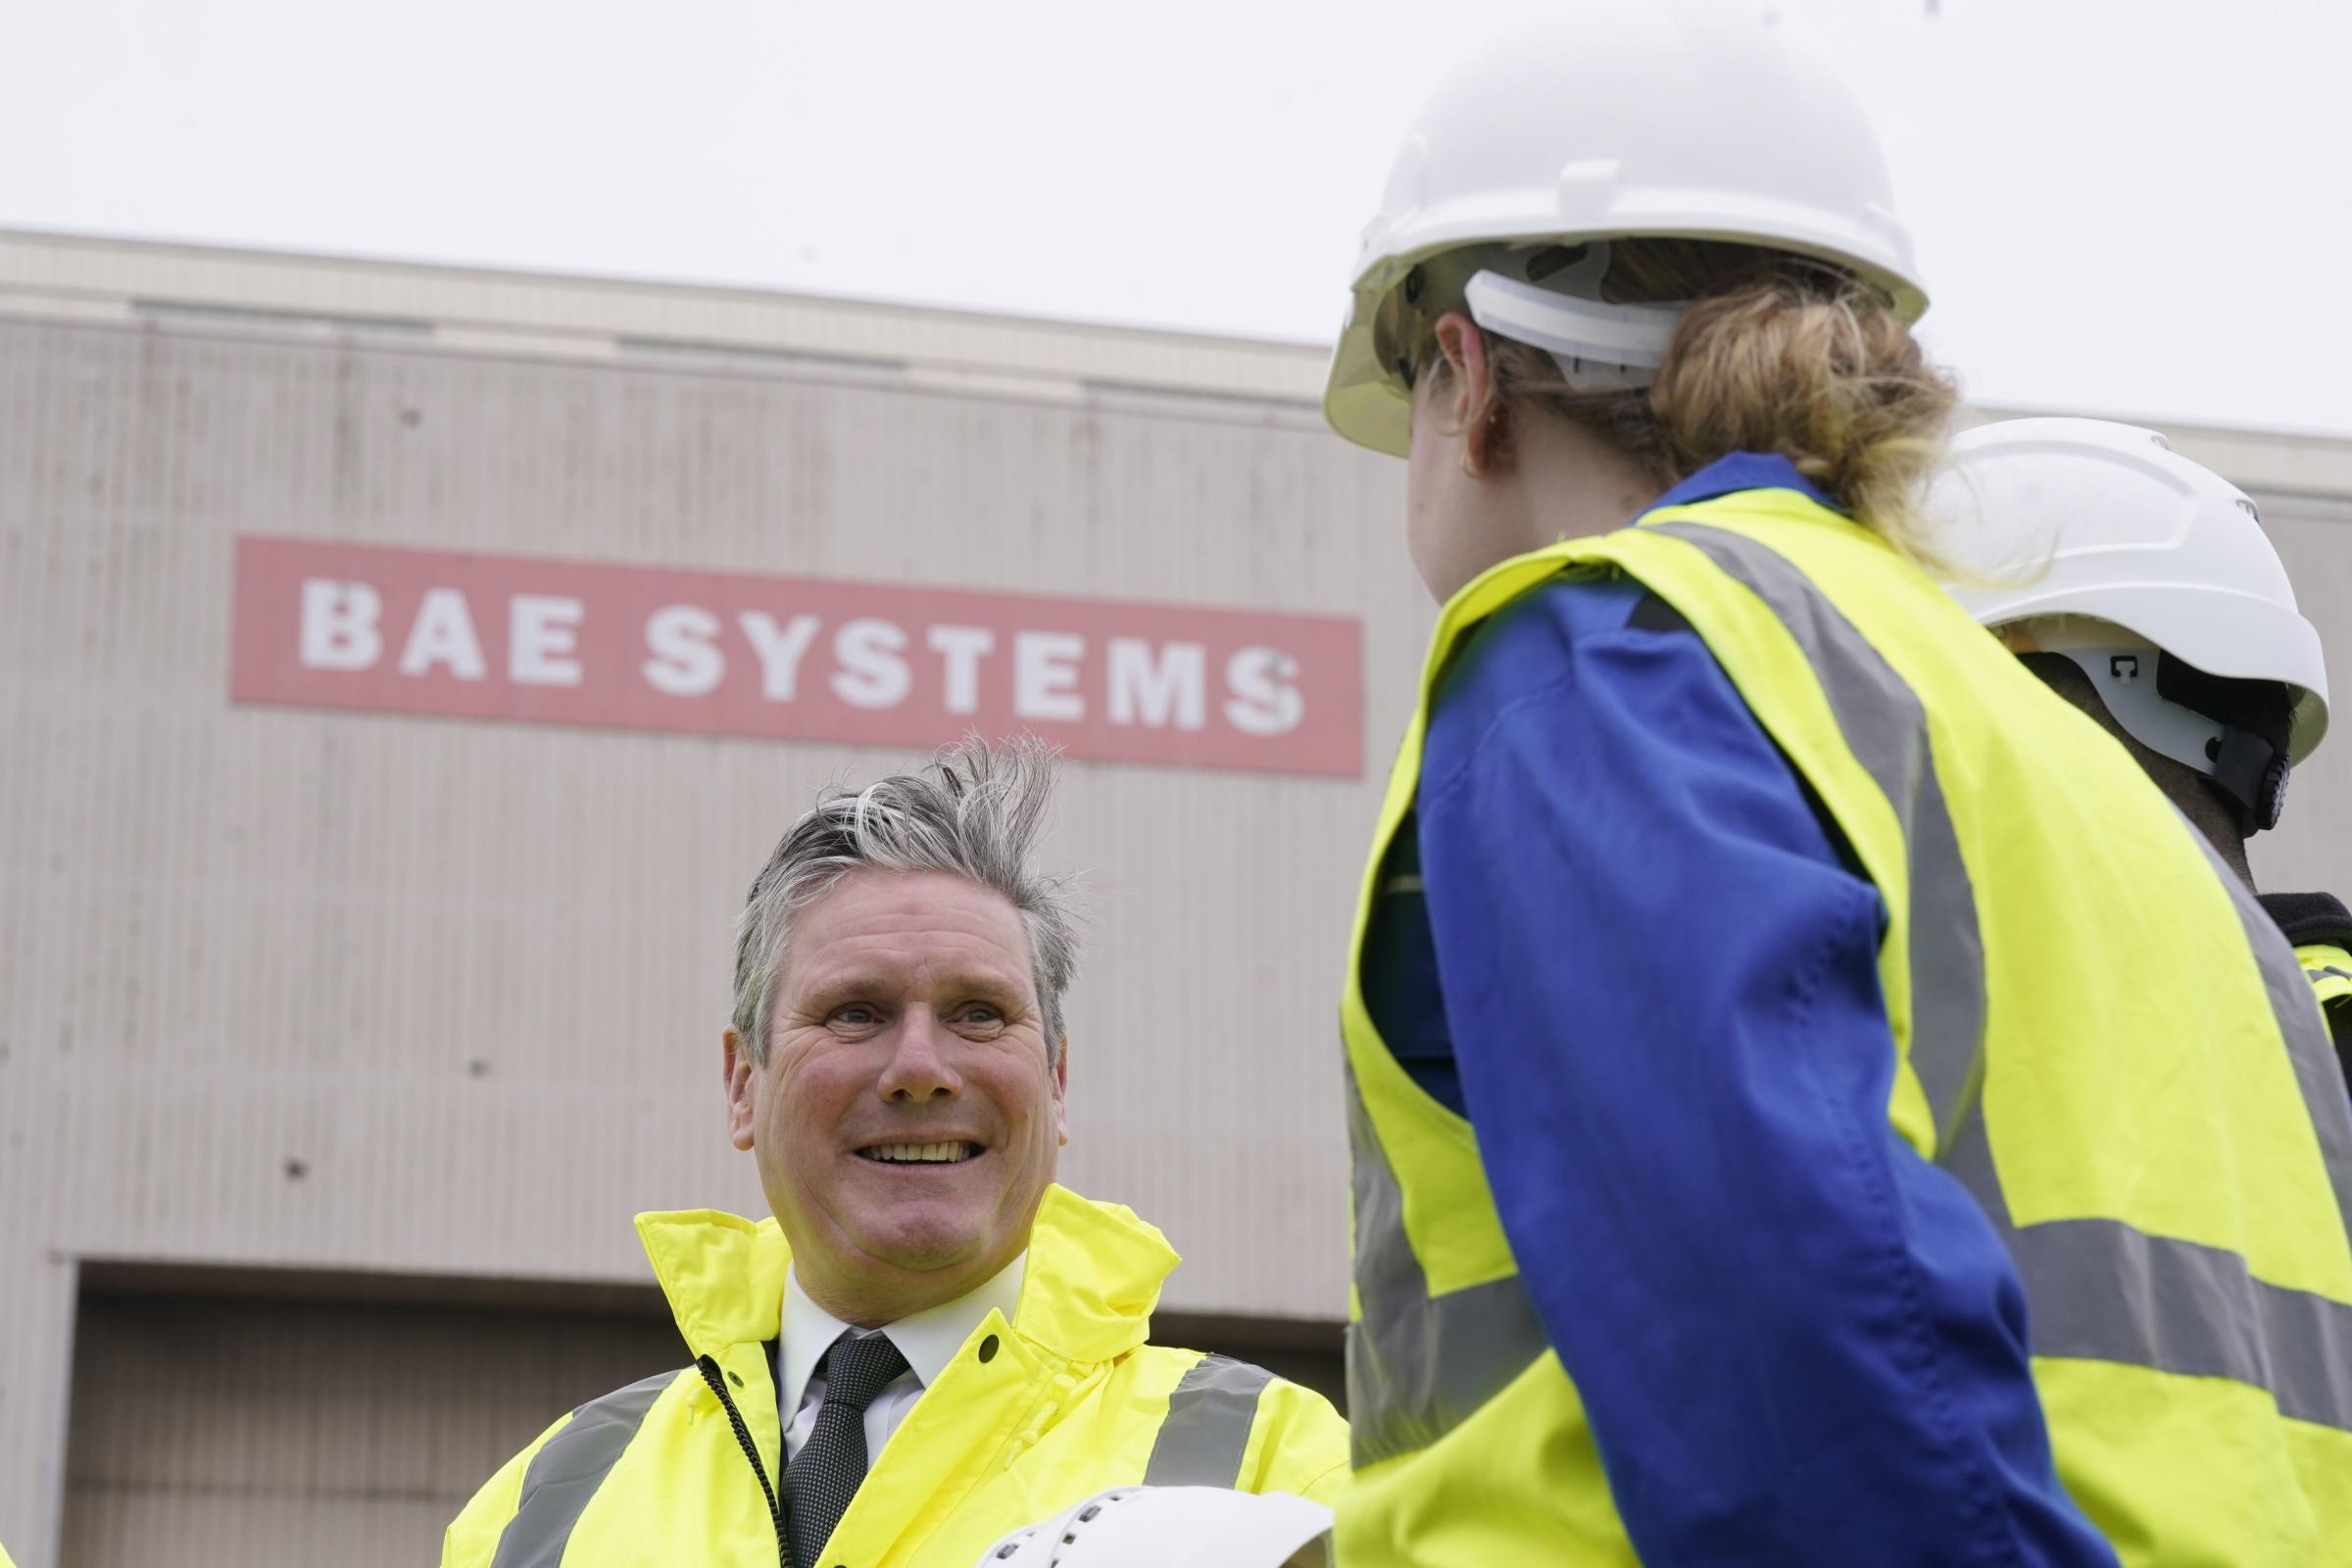 Labour Party leader Sir Keir Starmer talking to workers during a campaign visit to BAE Systems in Barrow-in-Furness, Cumbria. The Labour leader has said the UKs nuclear deterrent is the bedrock of his plan to keep Britain safe, and if elected,